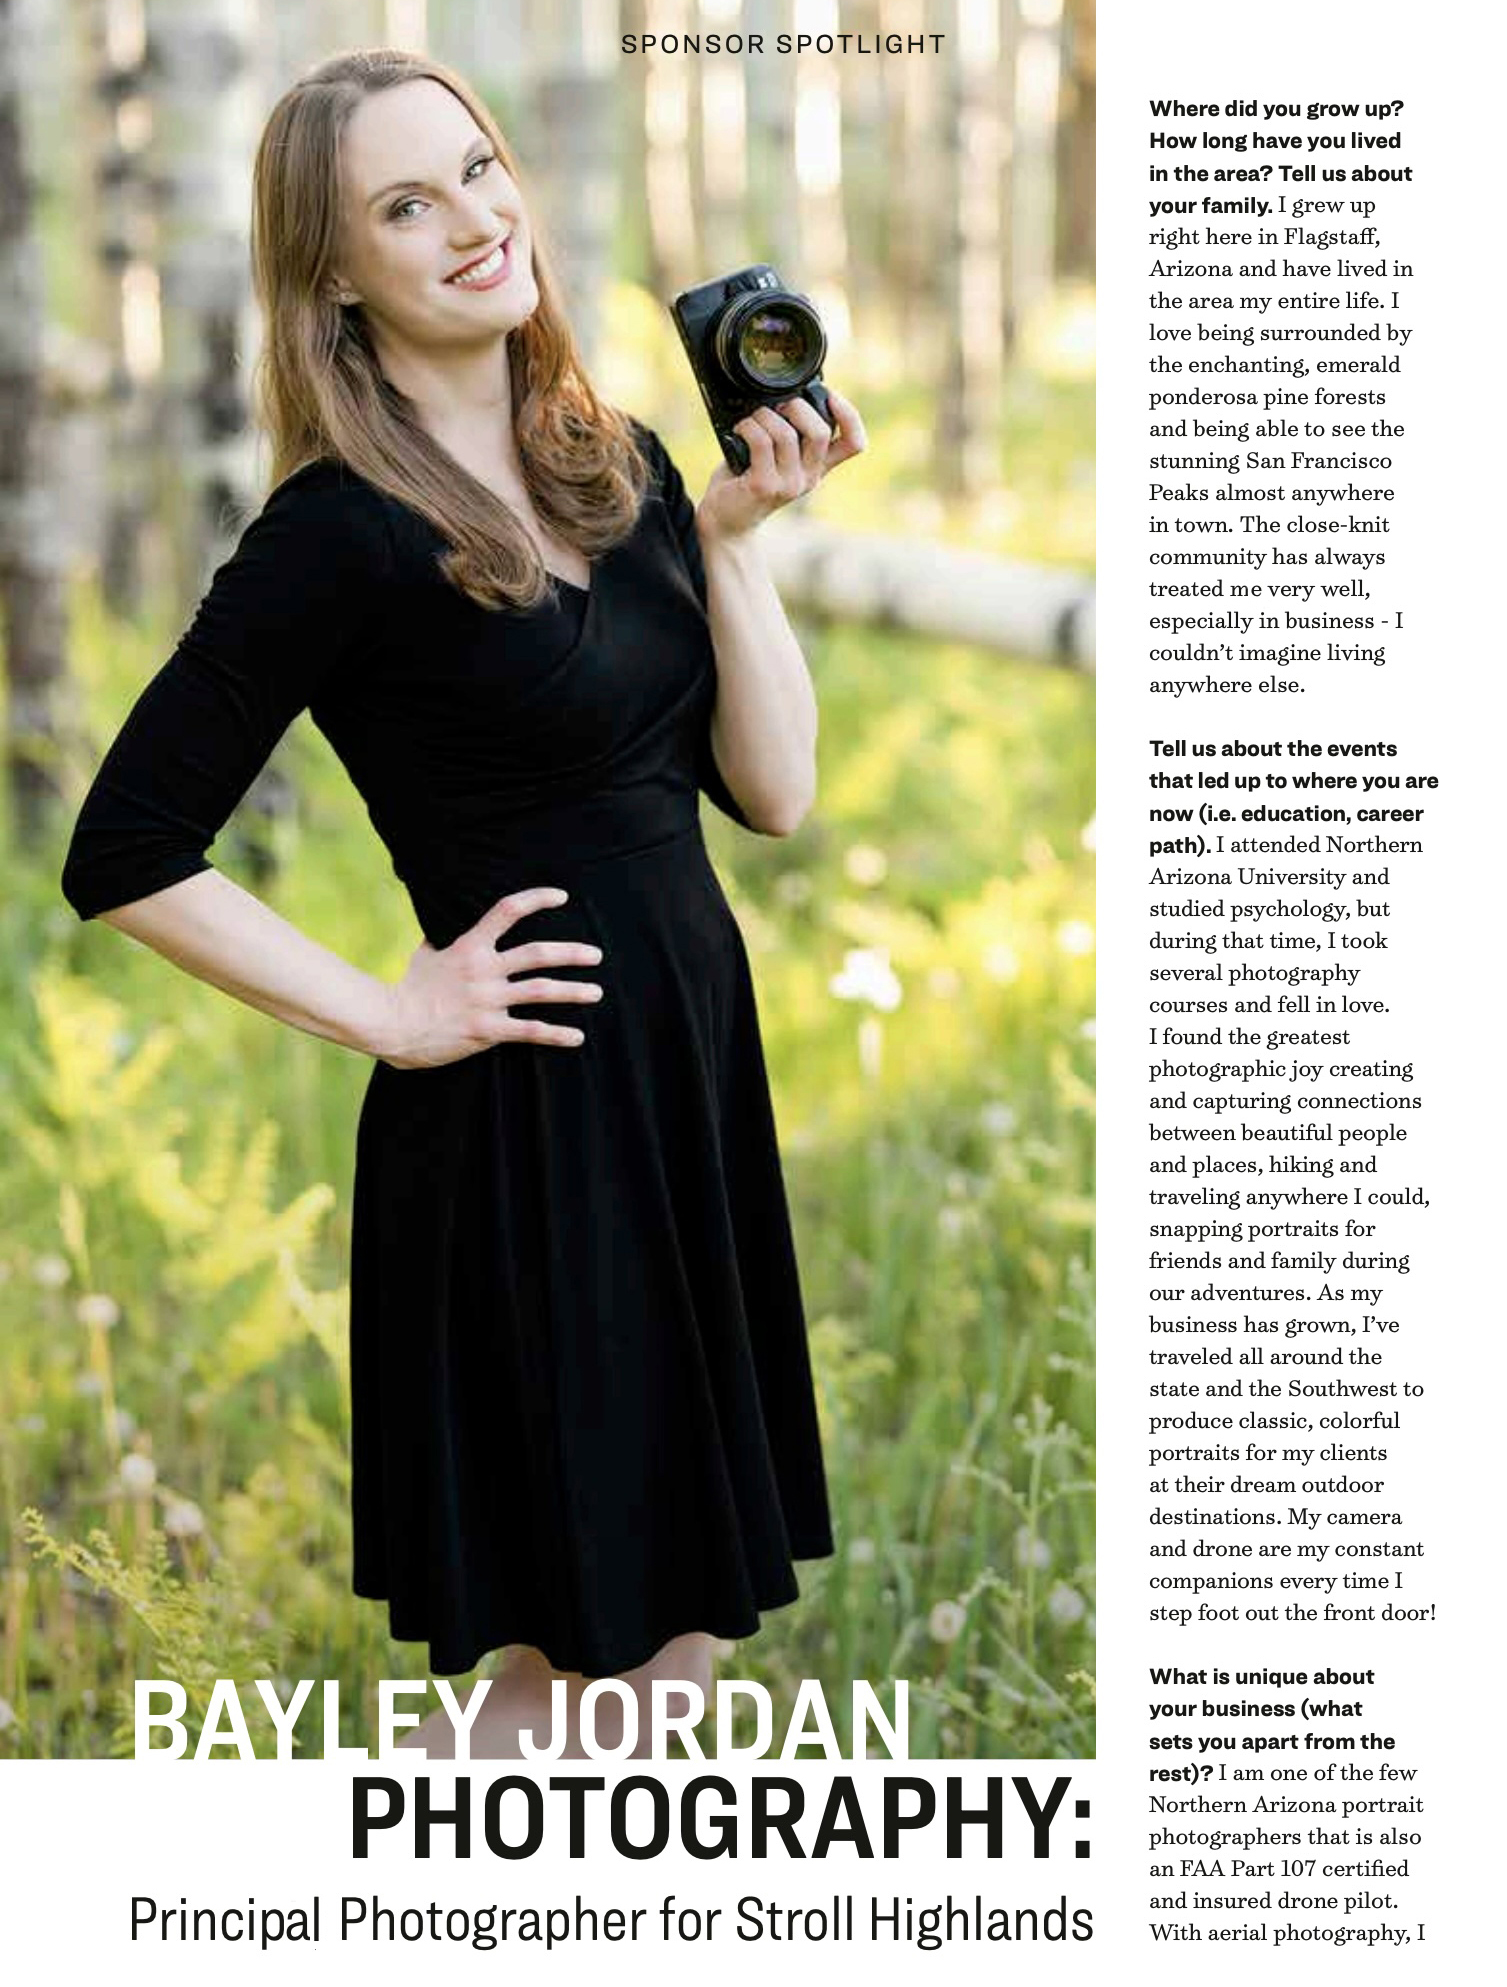 Bayley Jordan Photography has been featured in the February 2024 issue of Stroll Highlands Magazine in Flagstaff, Arizona.